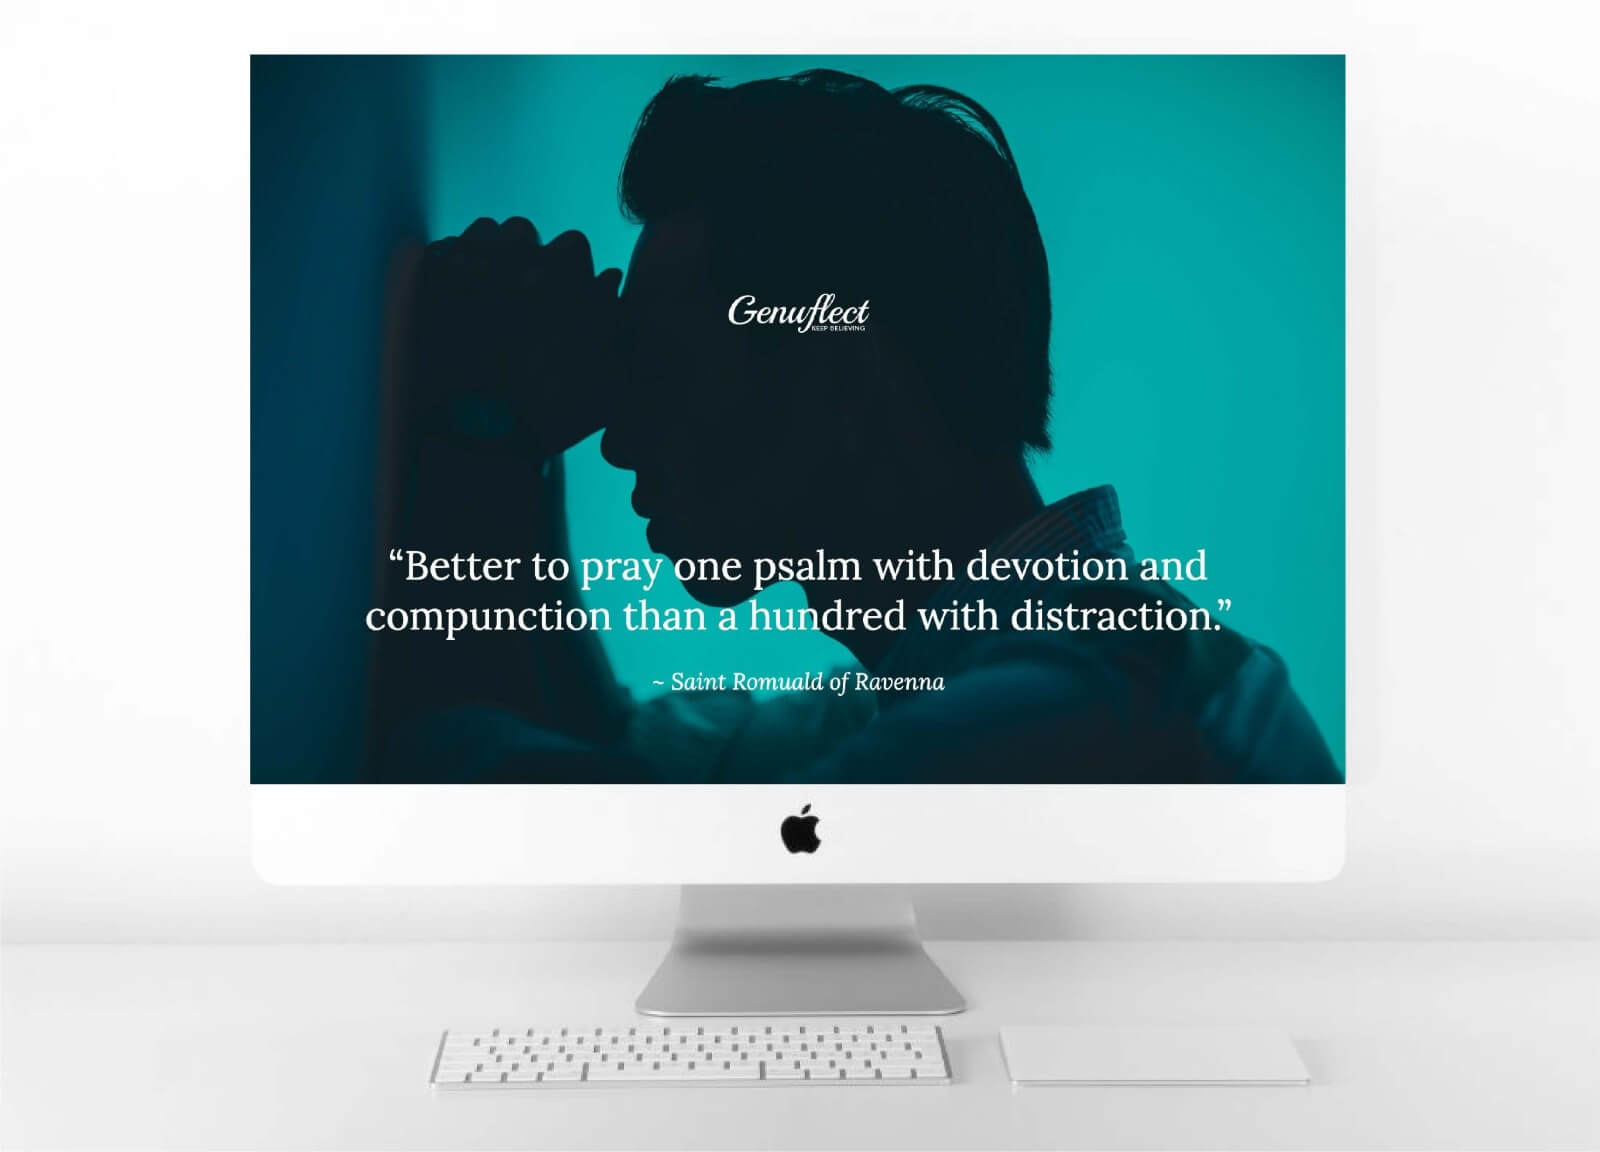 Genuflect computer background image of a Silhouette of a man with his hands folded in prayer up against his forehead